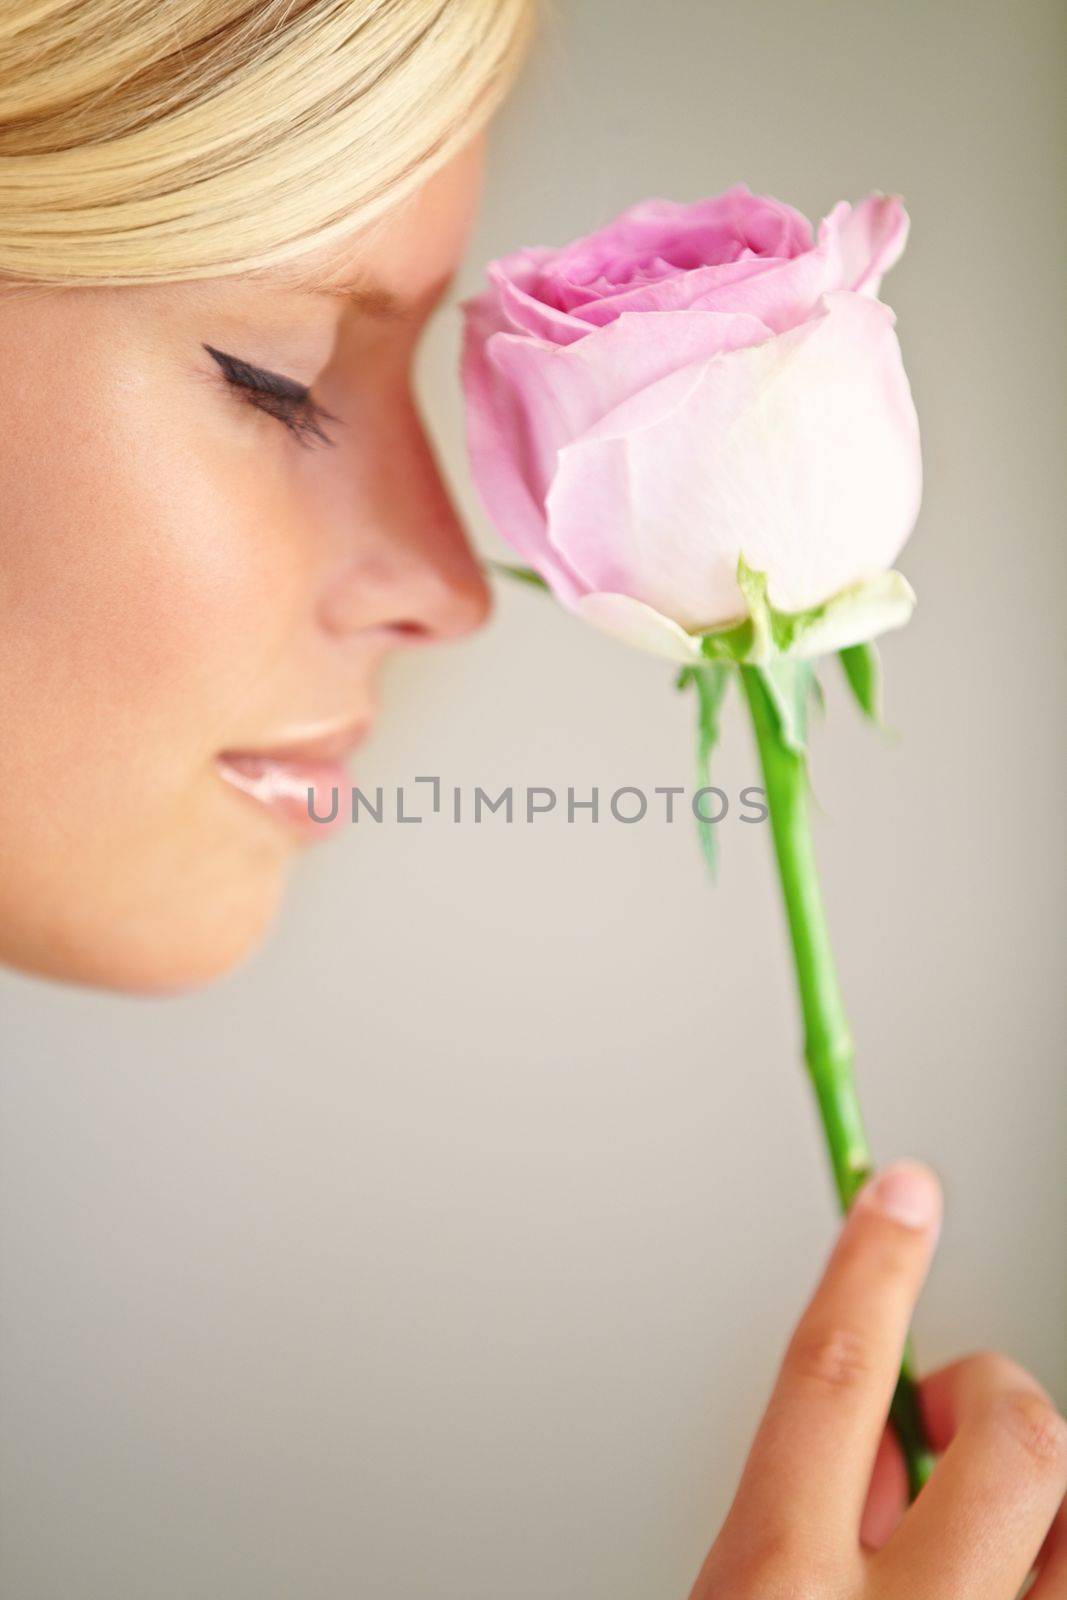 Flower, romance and woman in a studio with a rose for a fragrance, scent or aroma to smell. Floral, cosmetic and female model from Australia with a natural beauty makeup routine by a gray background